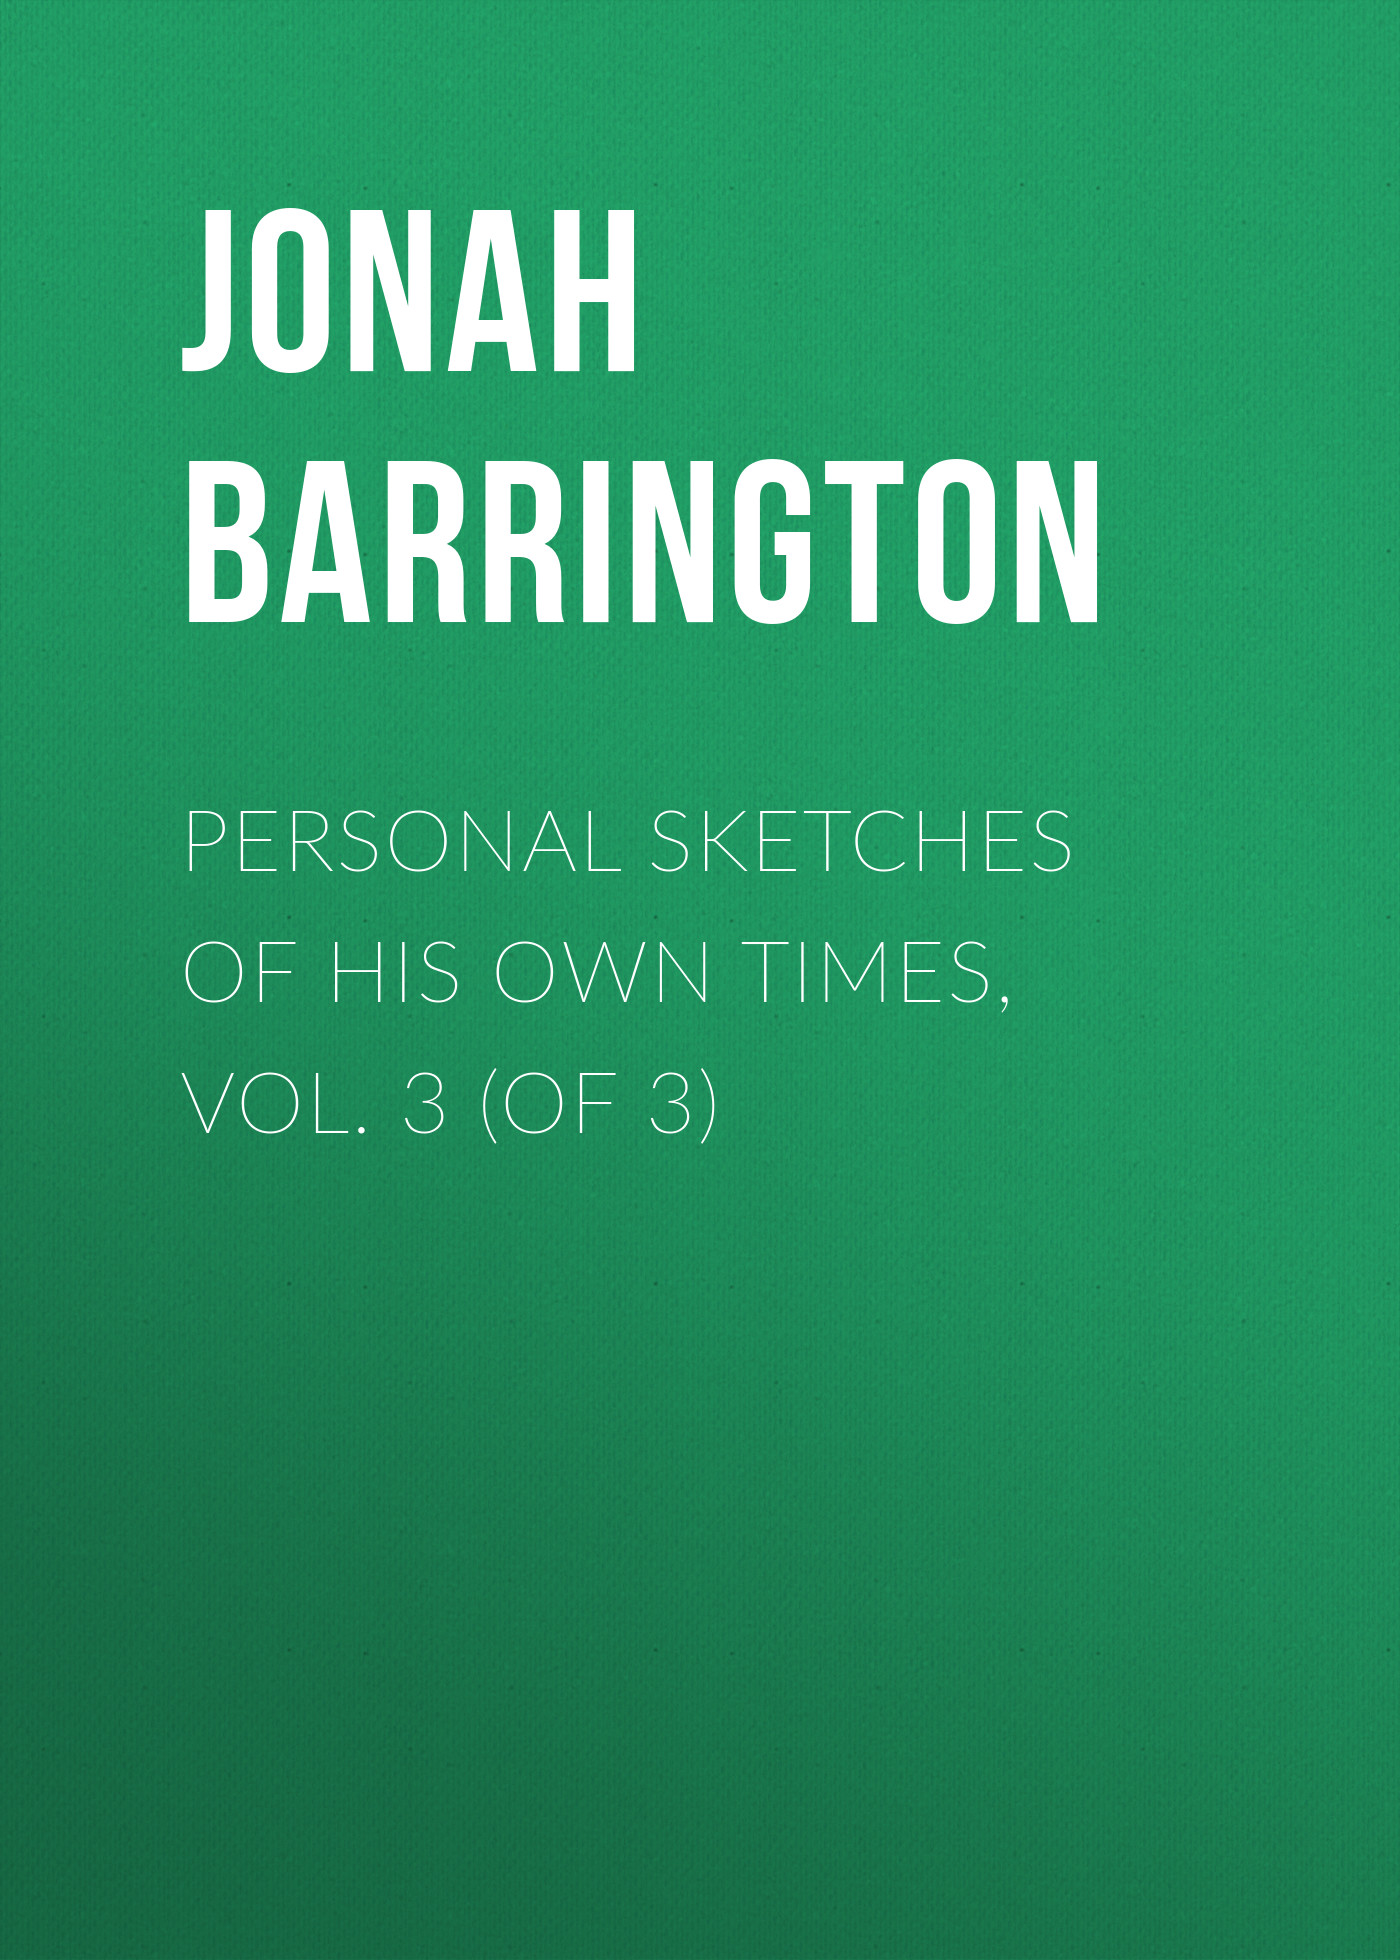 Jonah Barrington Personal Sketches of His Own Times, Vol. 3 (of 3)